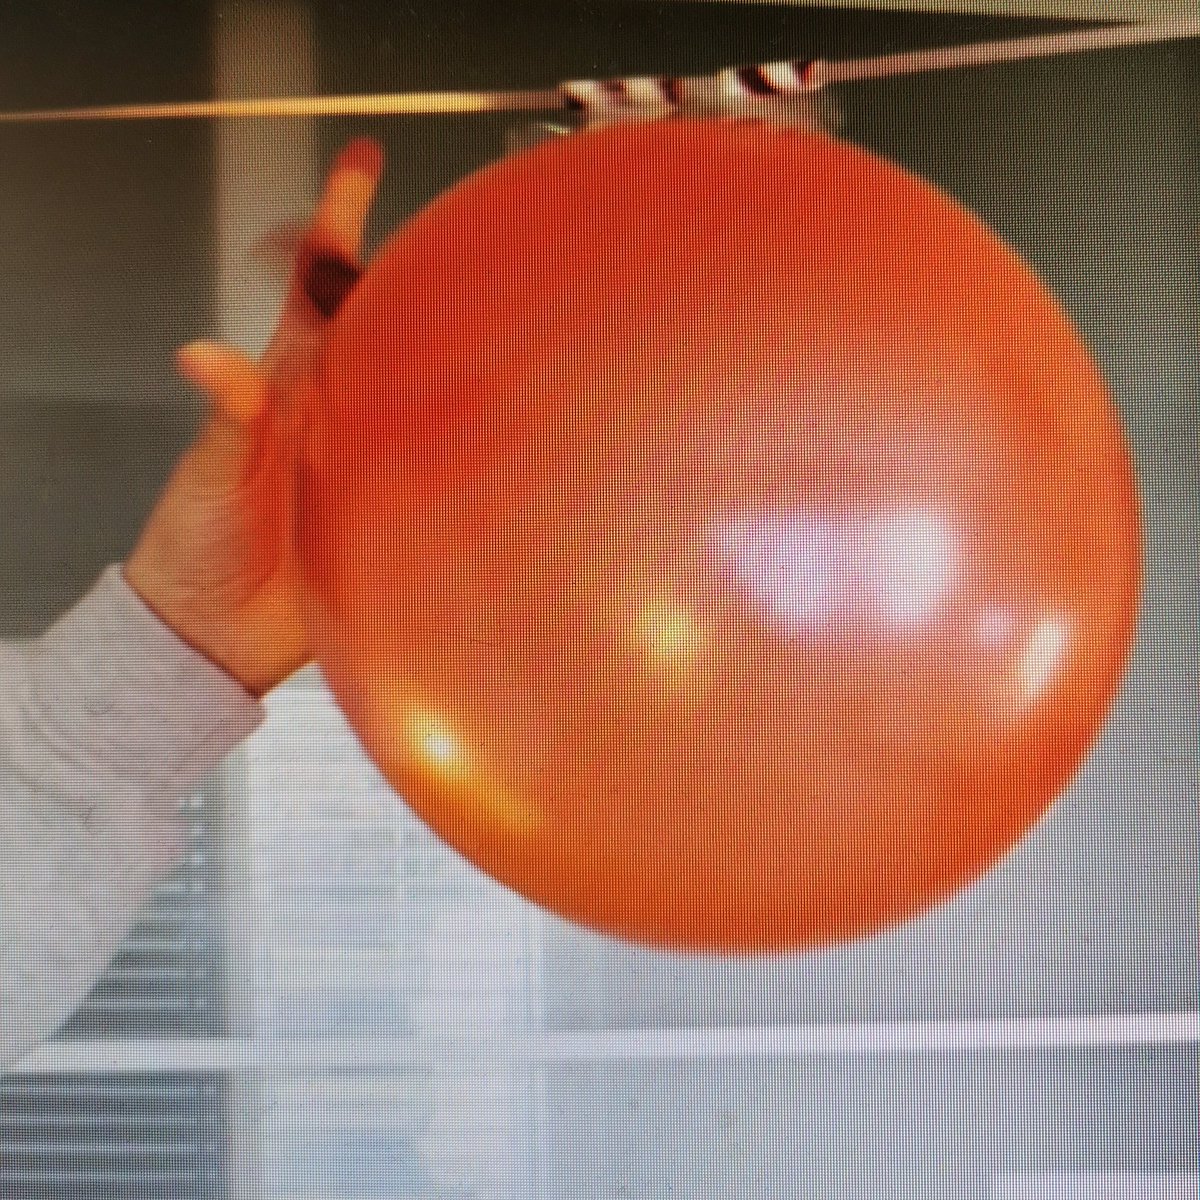 Well done Beth in Year 8 for making a rocket balloon to investigate air pressure! Amazing! 🎈👩‍🔬👨‍🔬
If you want to learn more about air pressure check out this link,
bbc.co.uk/bitesize/guide…
#hccslearning #hccs #hccsscience #ks3science #ks3physics #LockdownLearning #homelearning